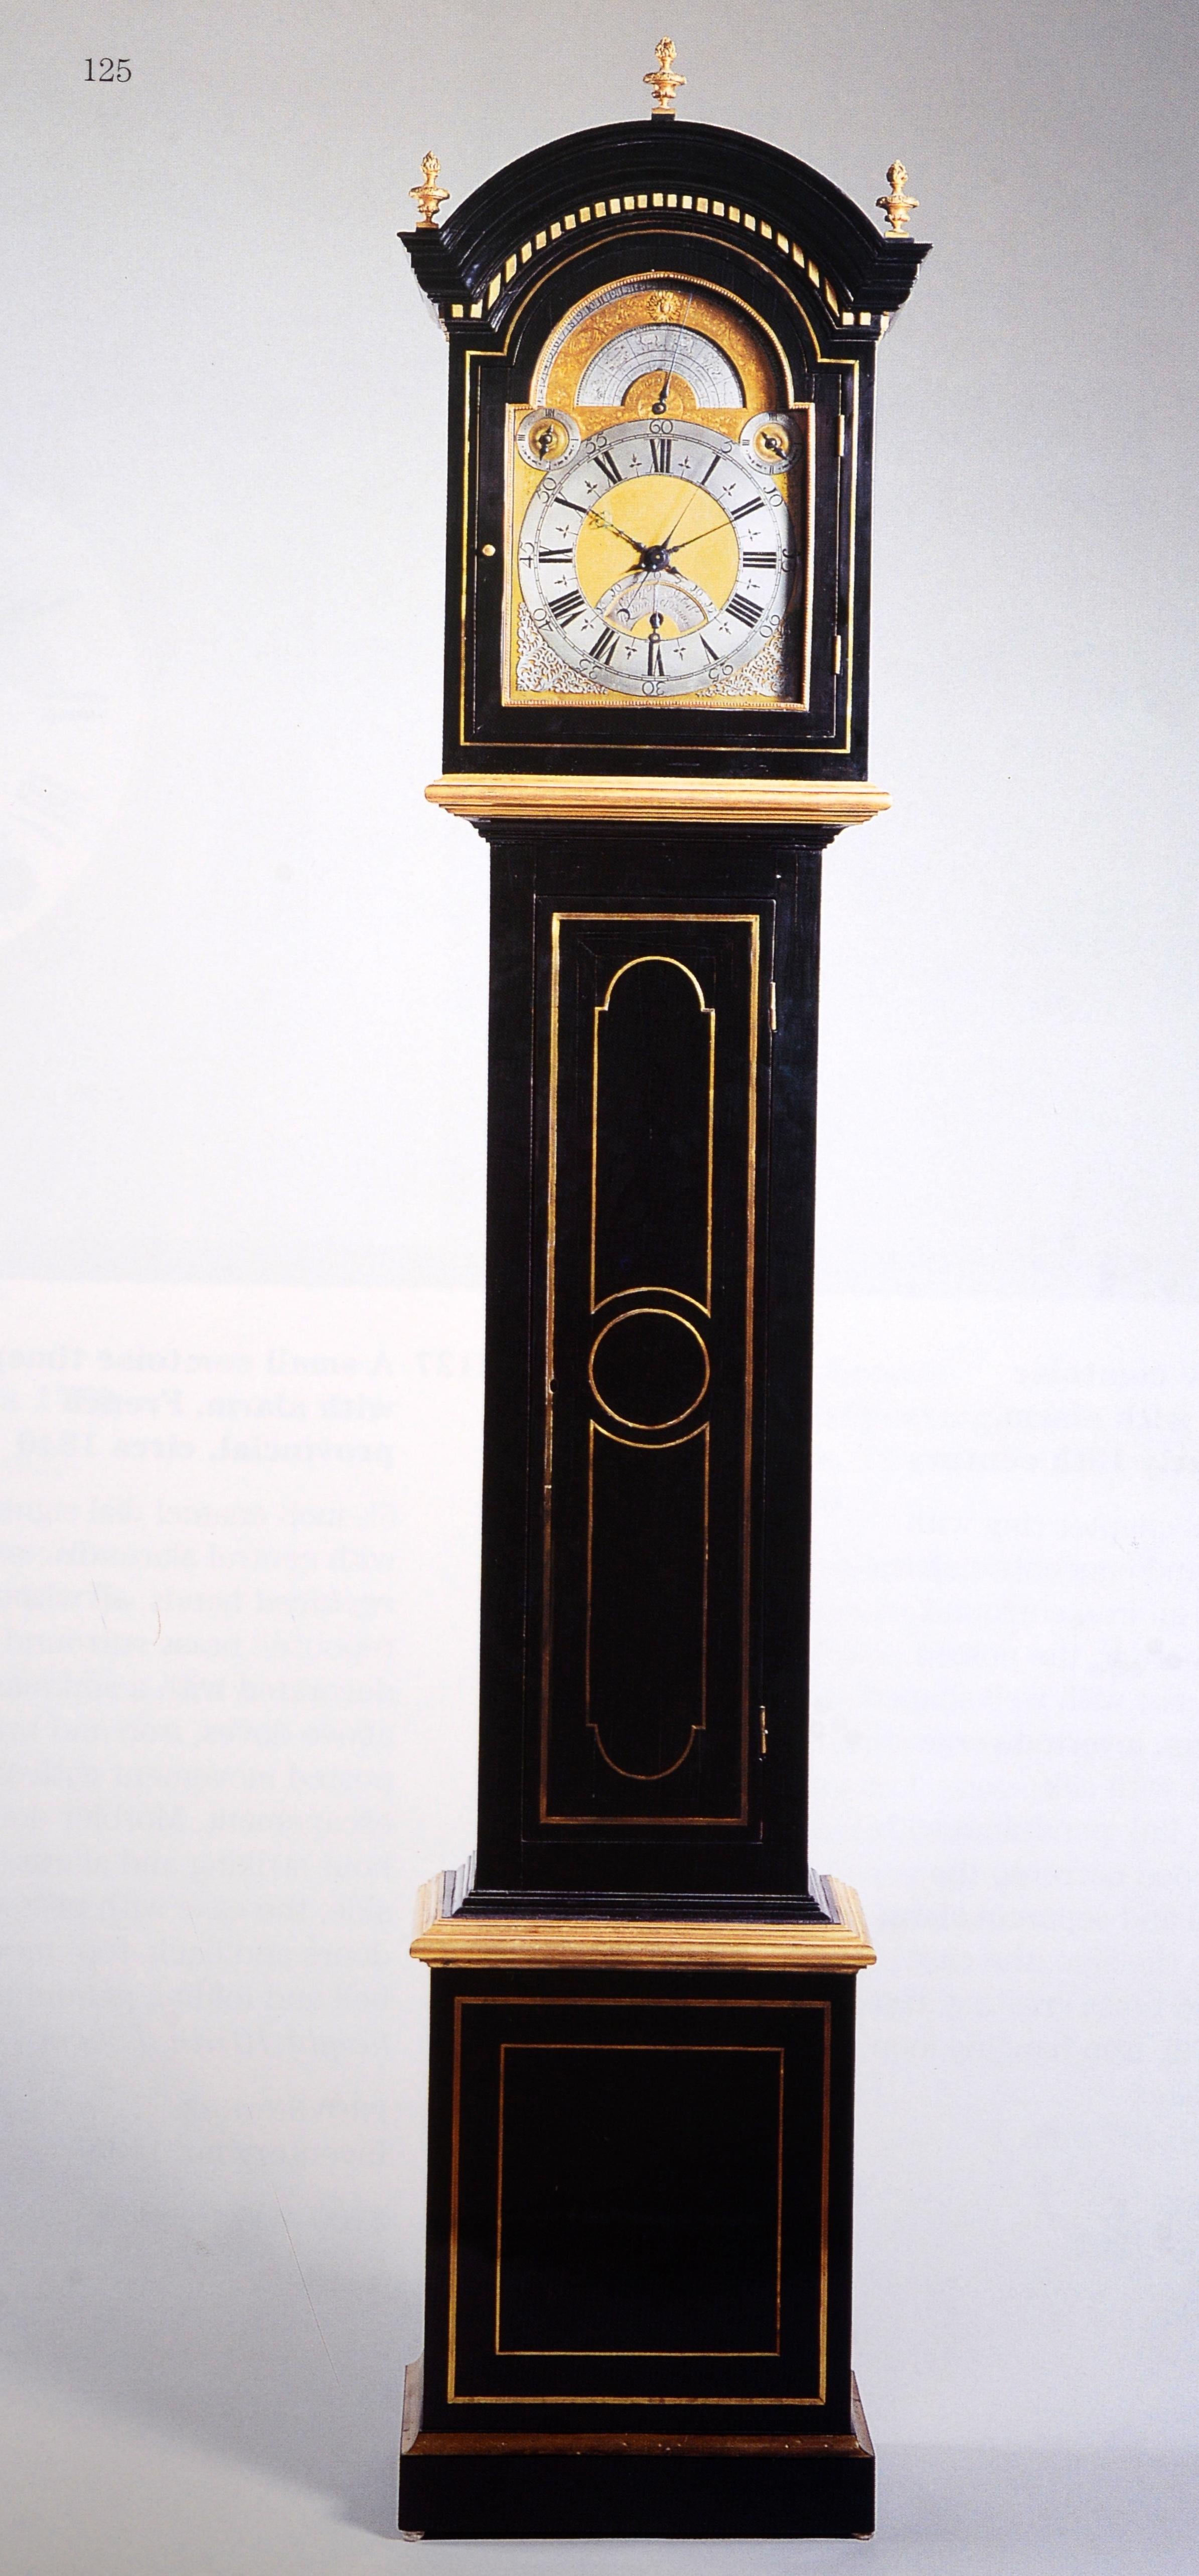 Contemporary Justice Warren Shepro Collection of Clocks: Sotheby's NY, April 26, 2001, 1st Ed For Sale